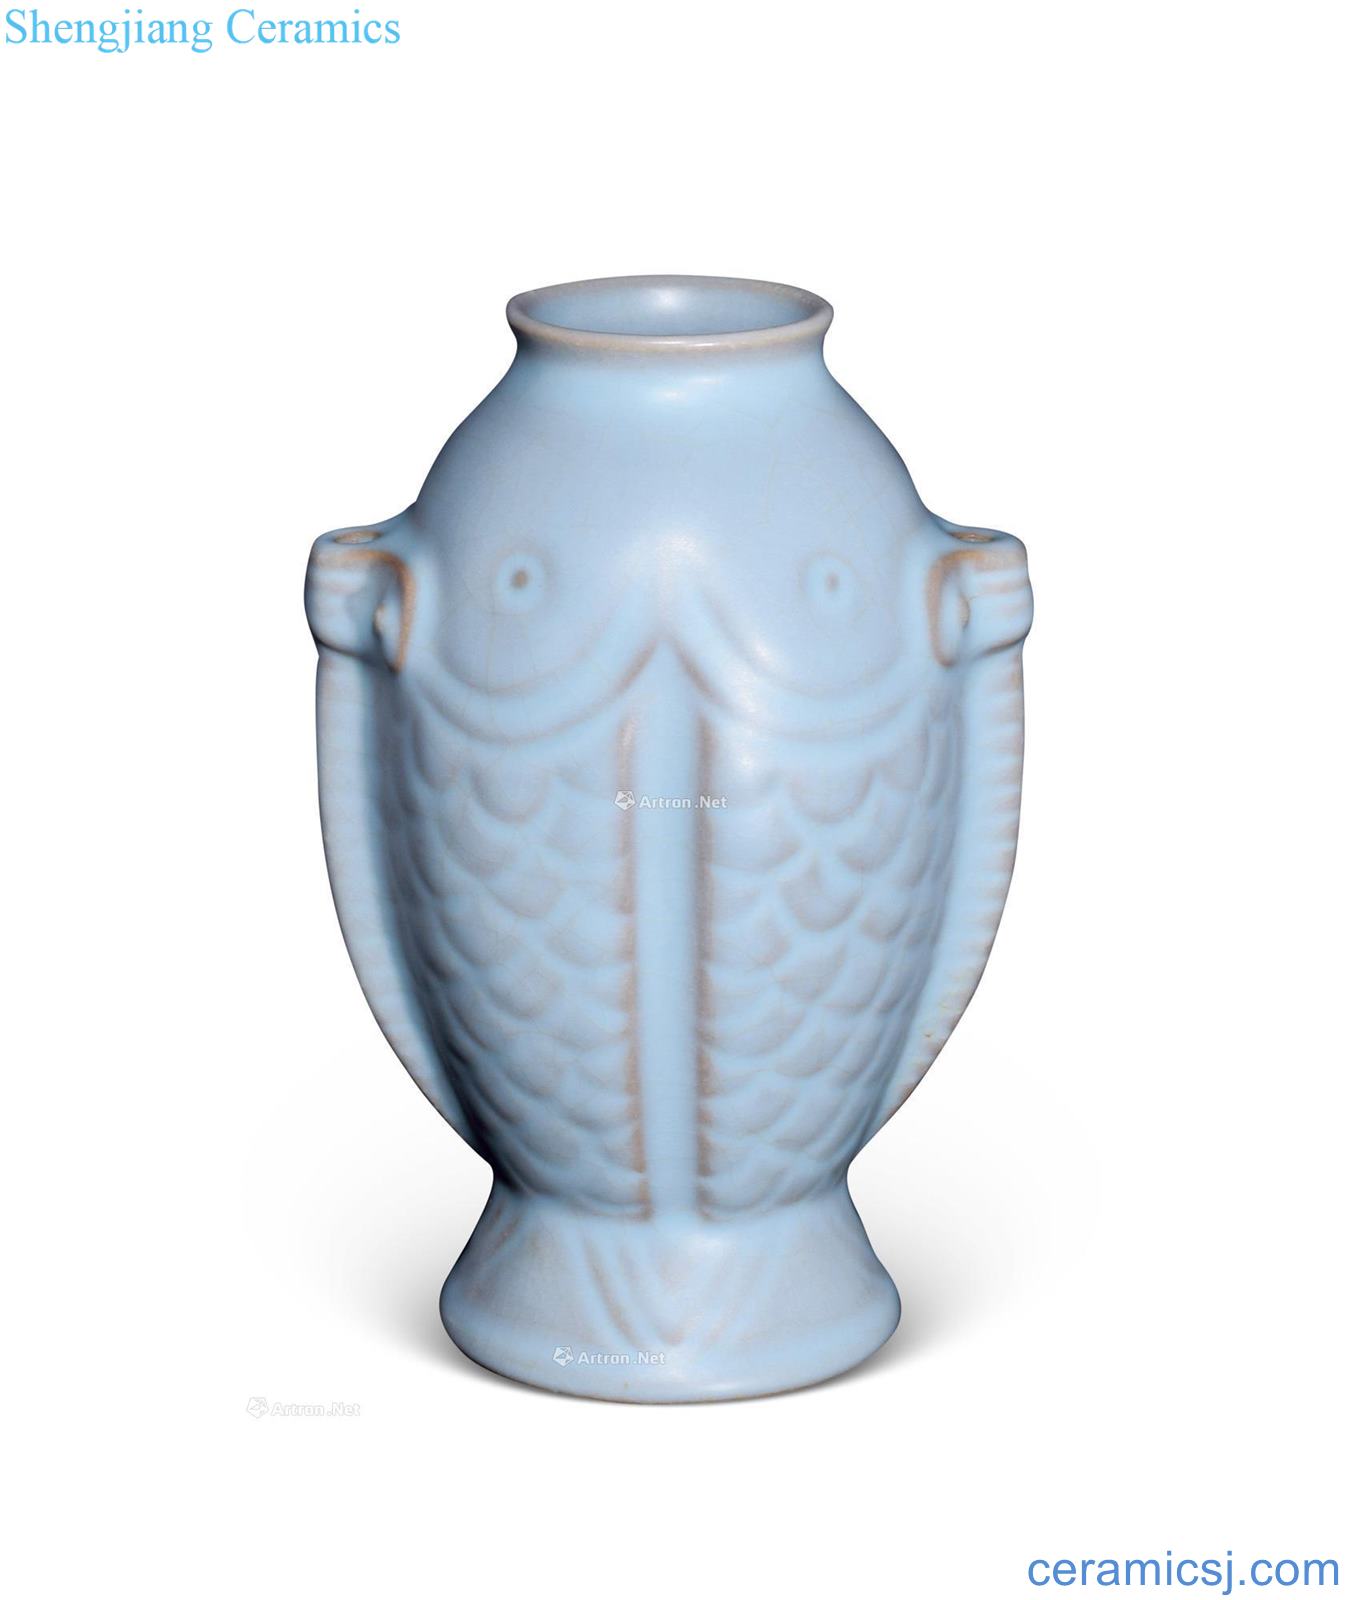 The song dynasty Your kiln azure glaze Pisces